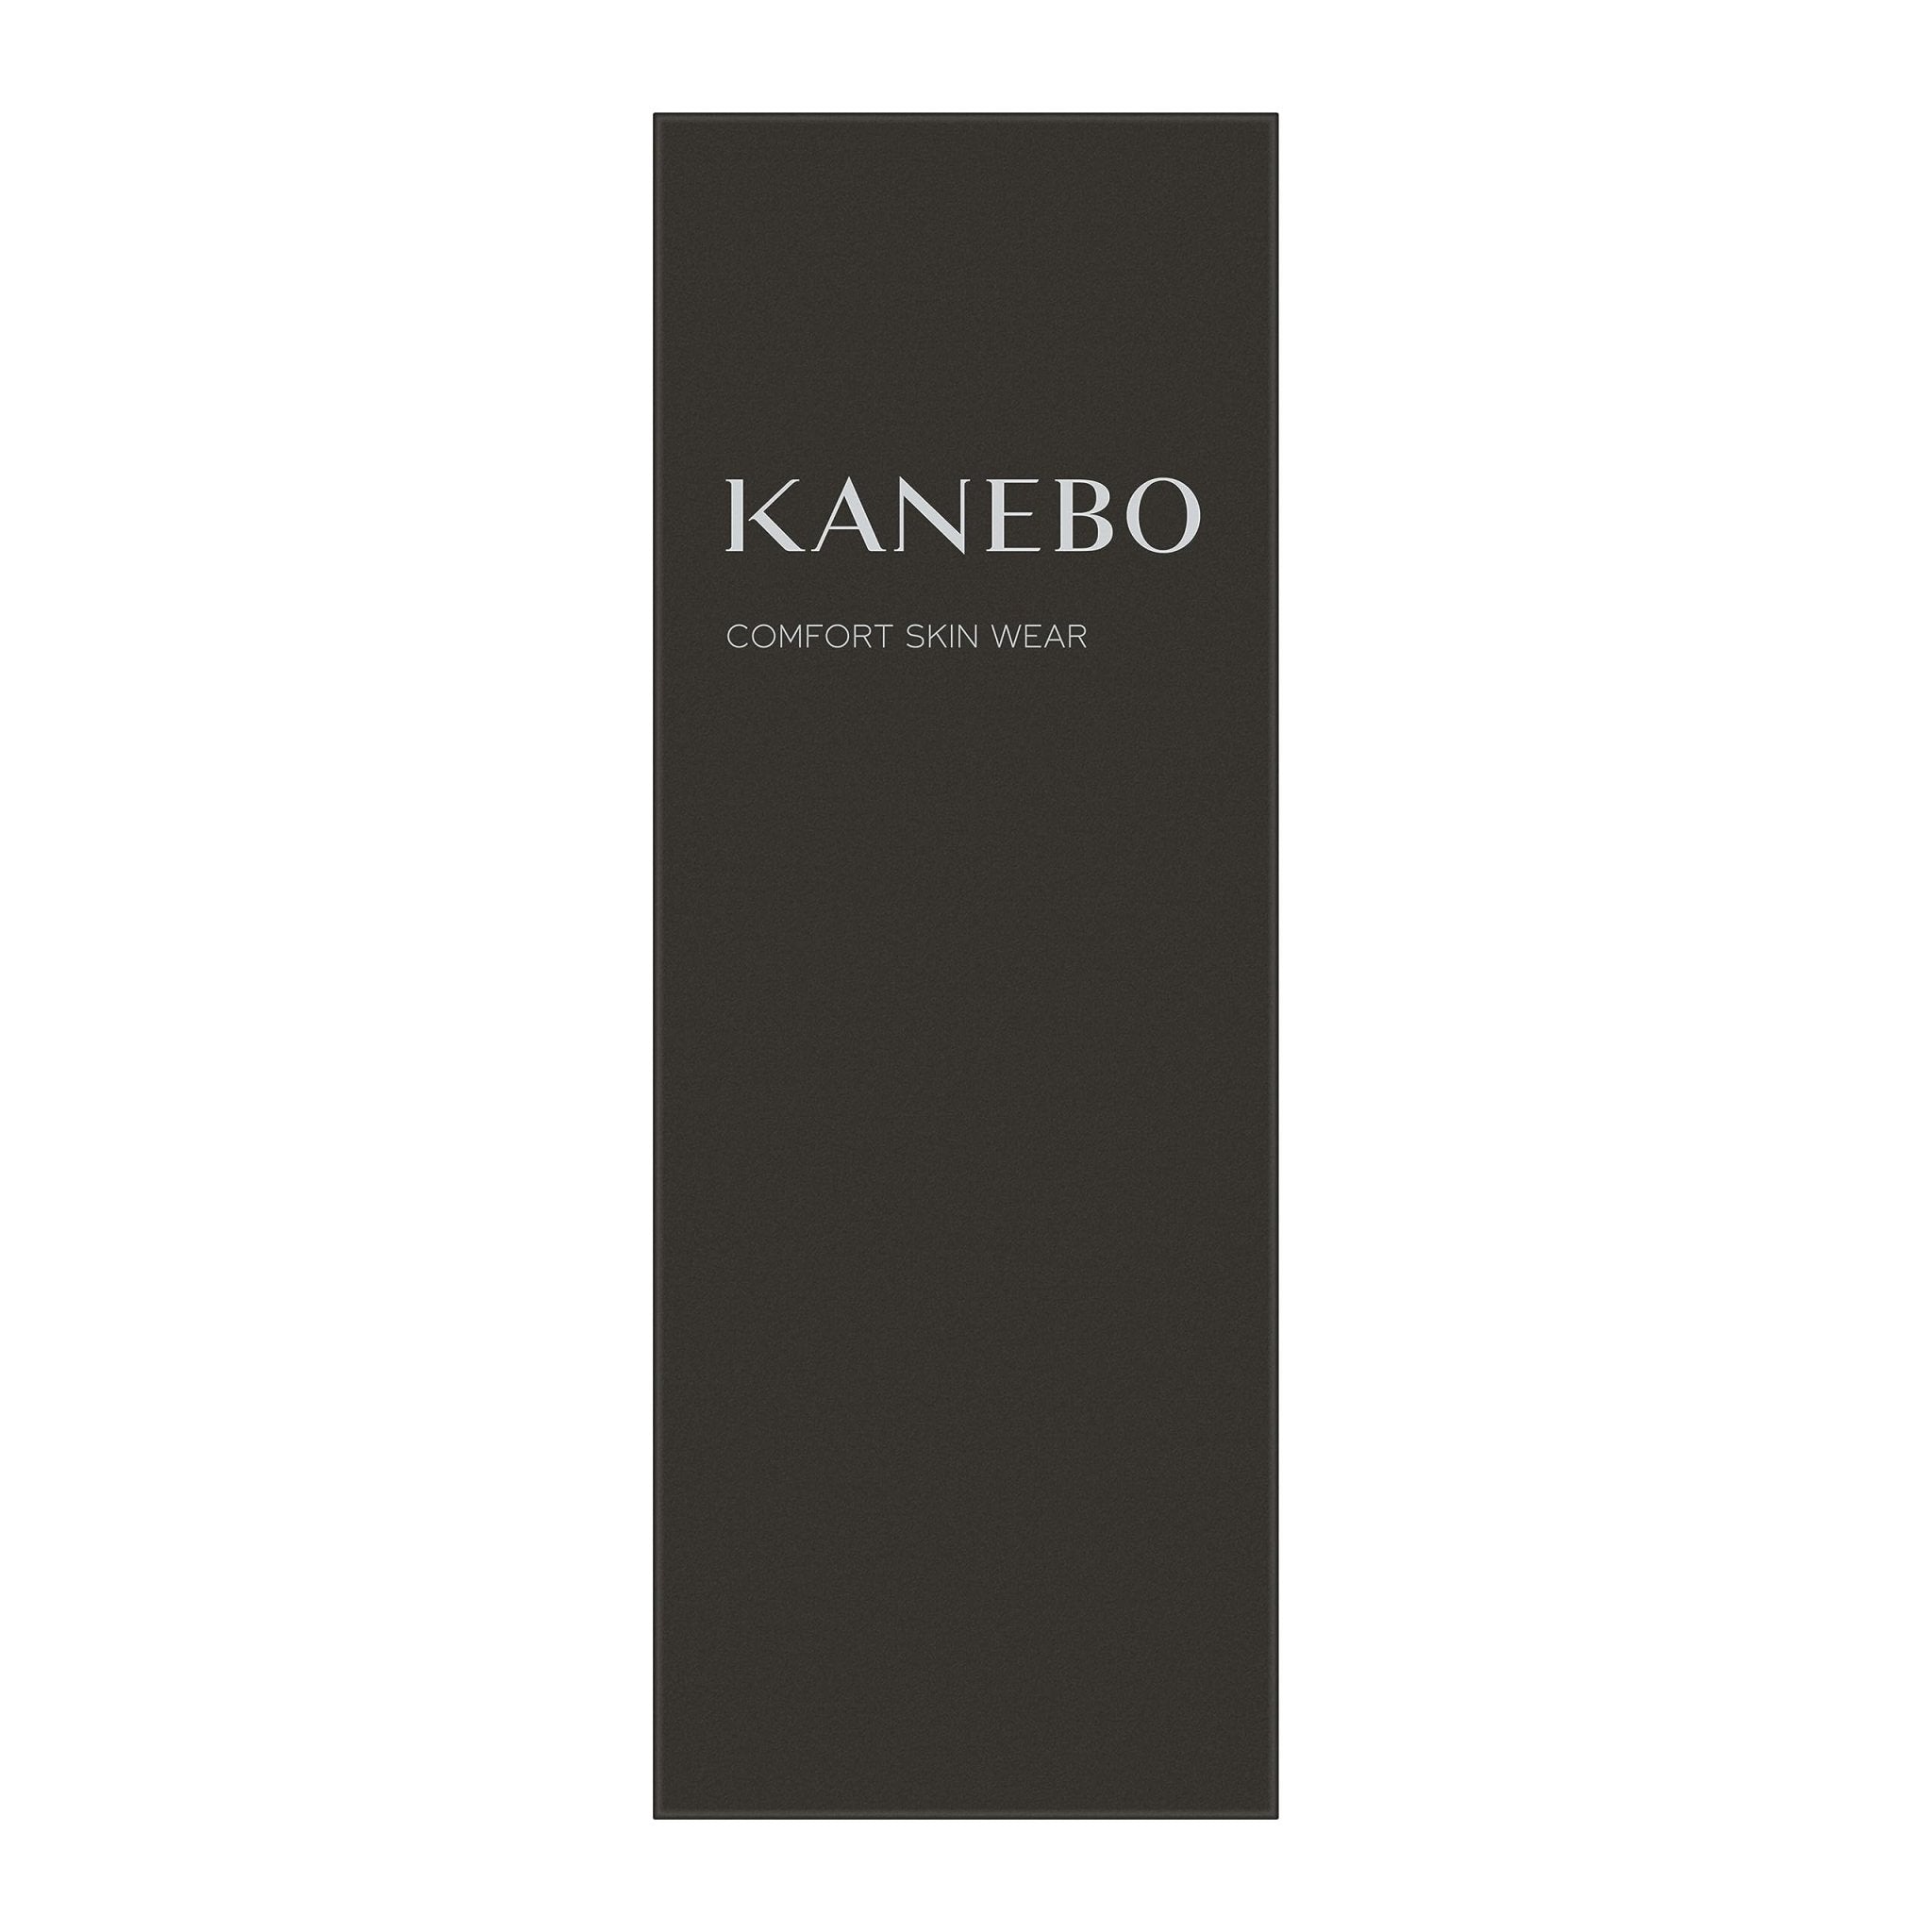 Kanebo Comfort Skin Wear in Beige C - Smooth Foundation from Kanebo